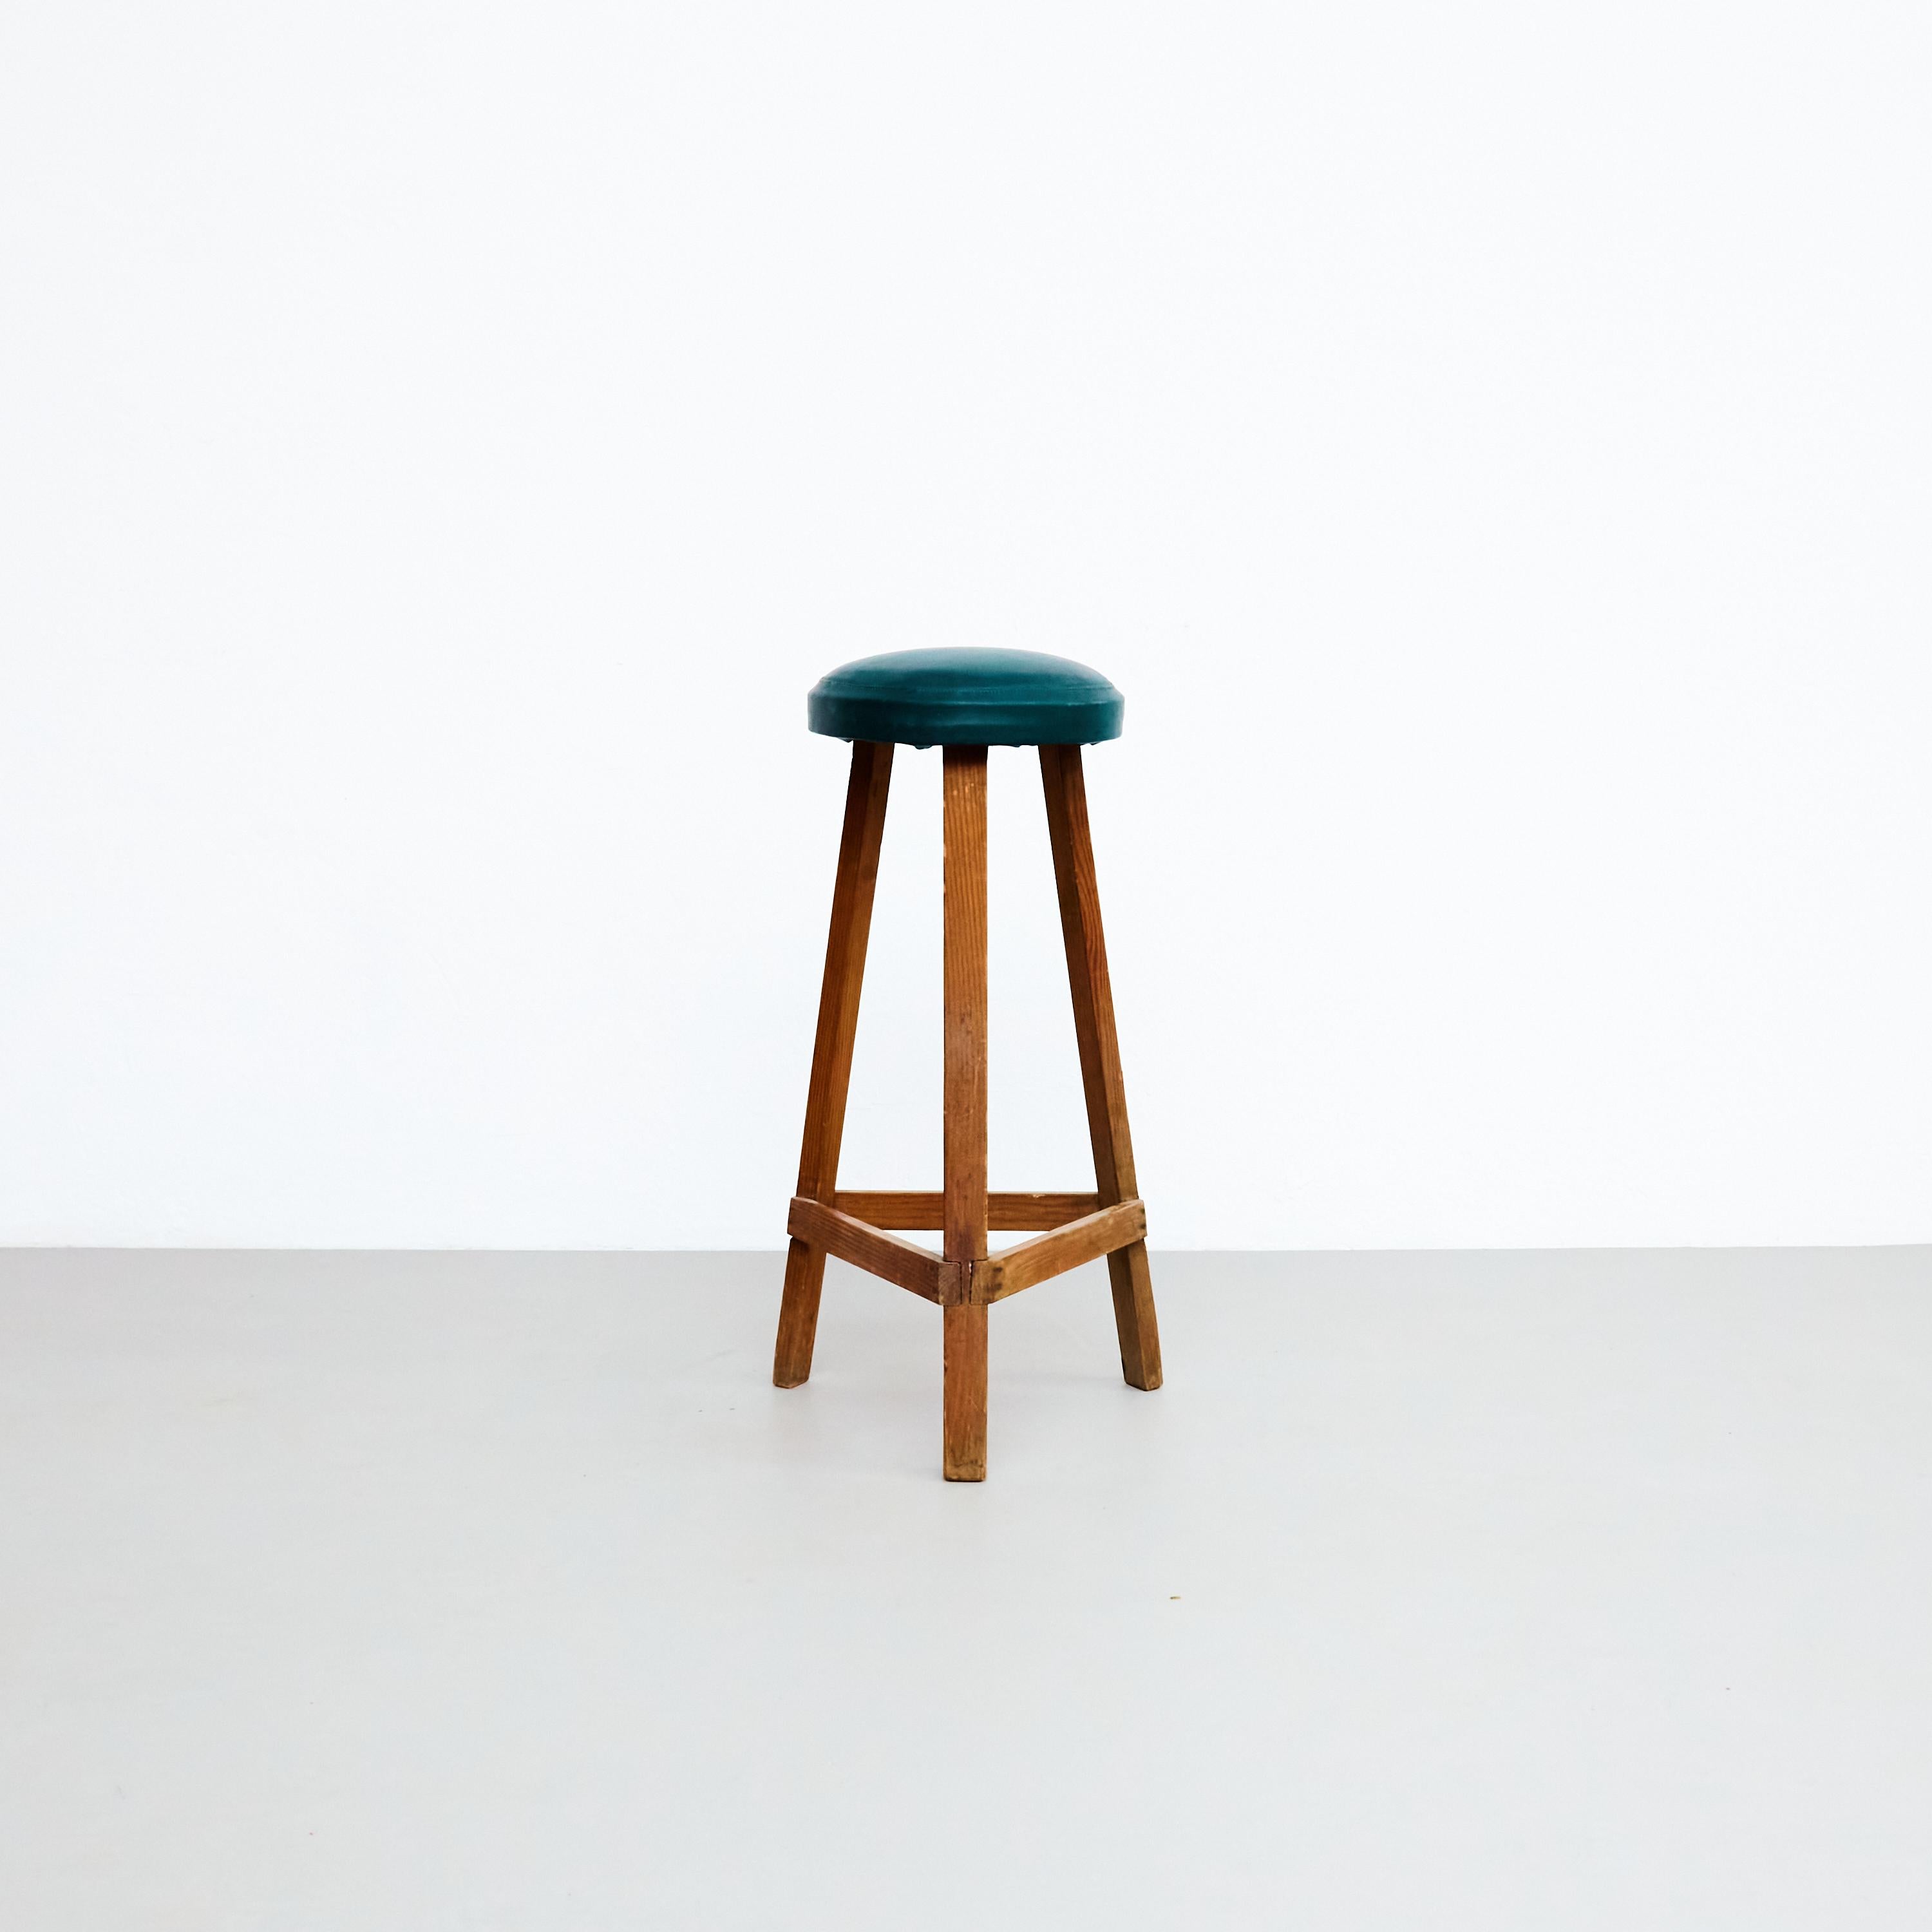 French Mid-Century Modern Rationalist Wood High Stool, circa 1950 For Sale